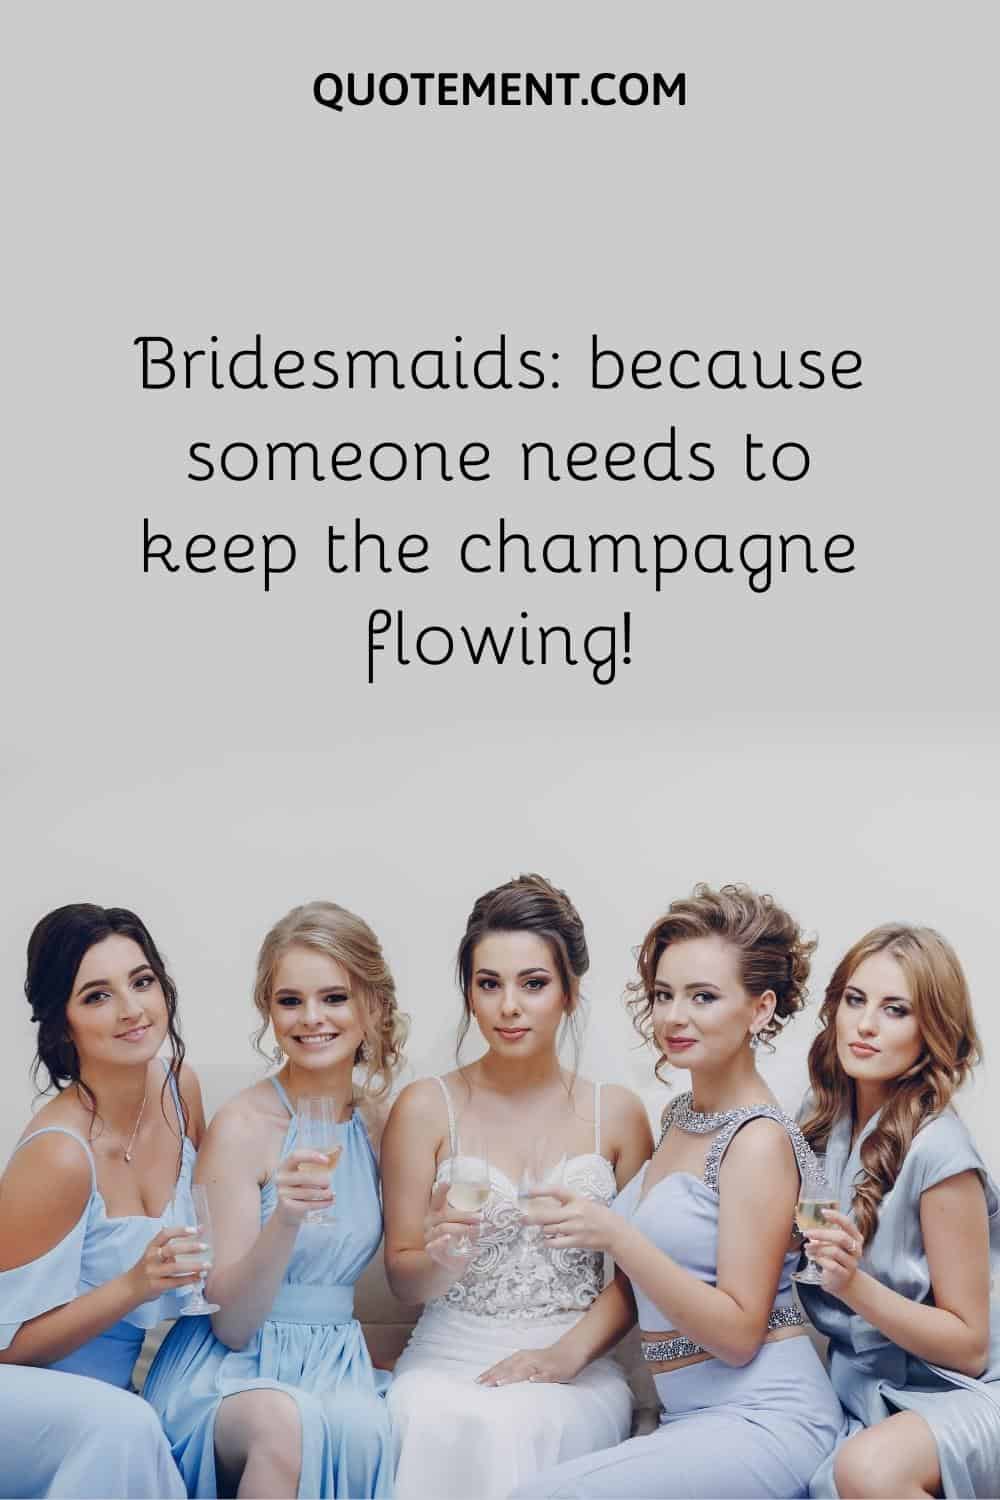 Bridesmaids because someone needs to keep the champagne flowing!